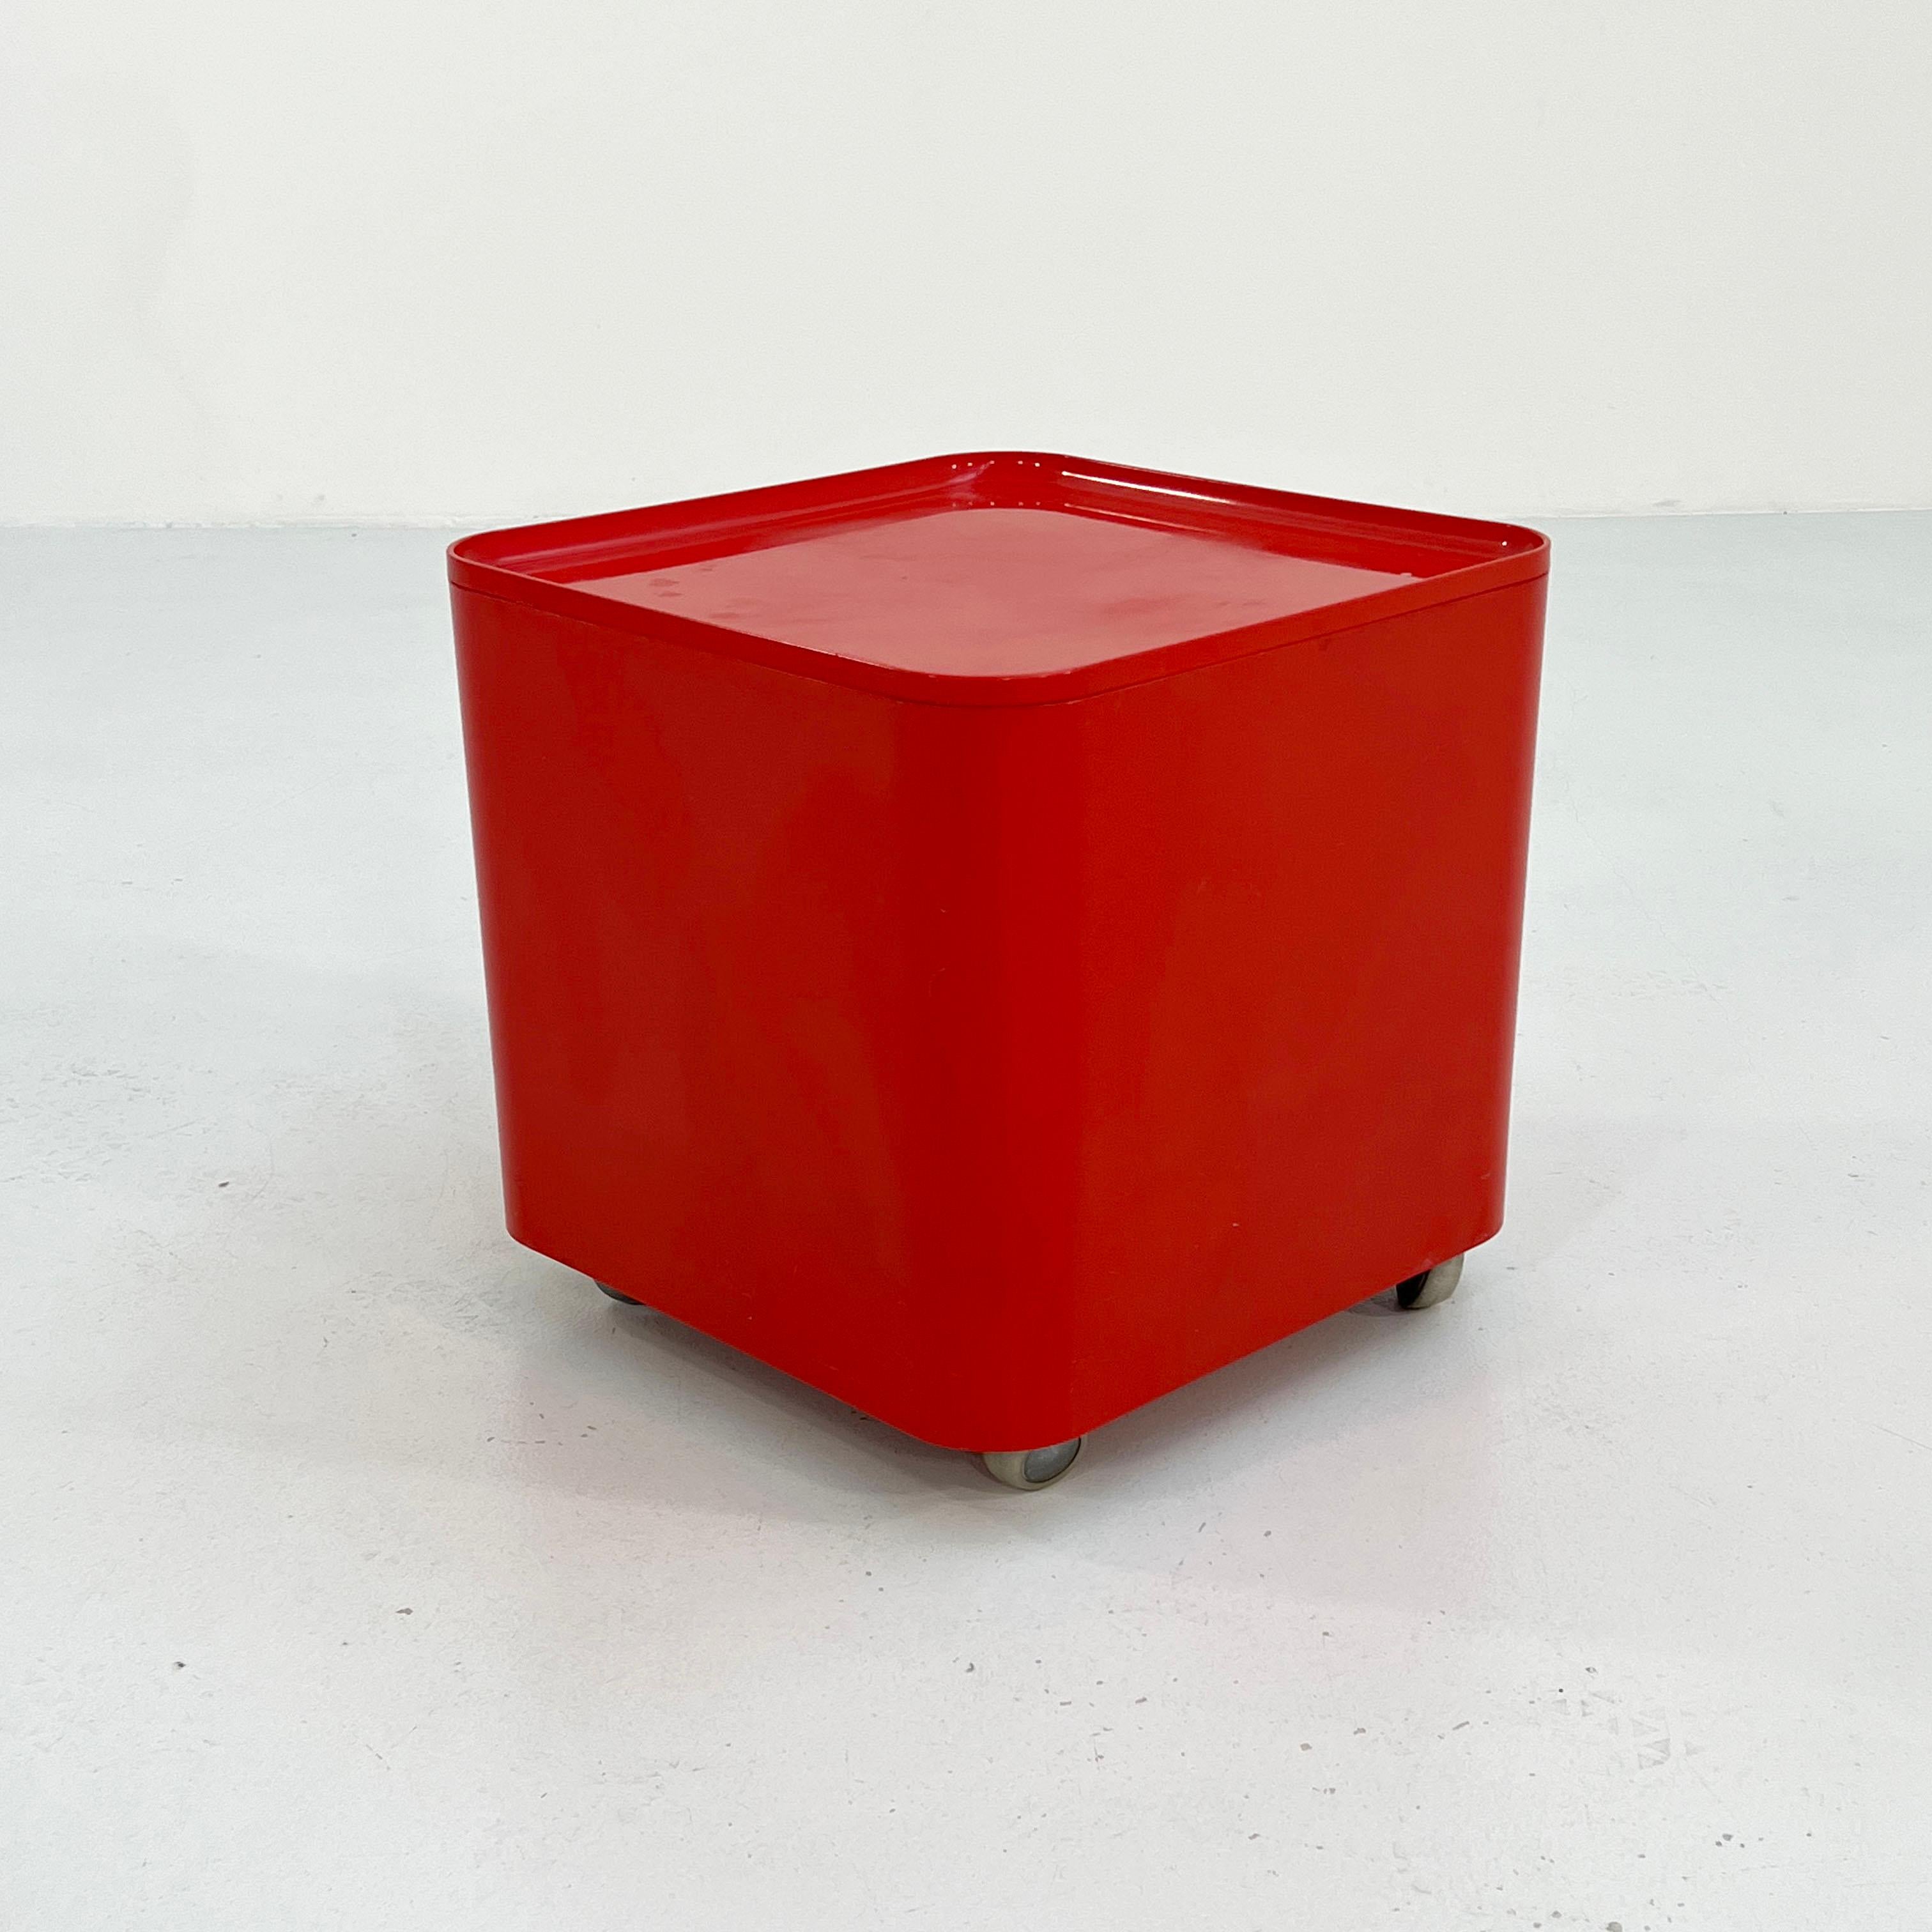 Dime side table/trolley on wheels by Marcello Siard for Longato, 1970s
2 pieces available - Price is per piece
Designer - Marcello Siard 
Producer - Longato
Model - Dime Trolley / Side Table
Design Period - Seventies
Measurements - Width 40 cm